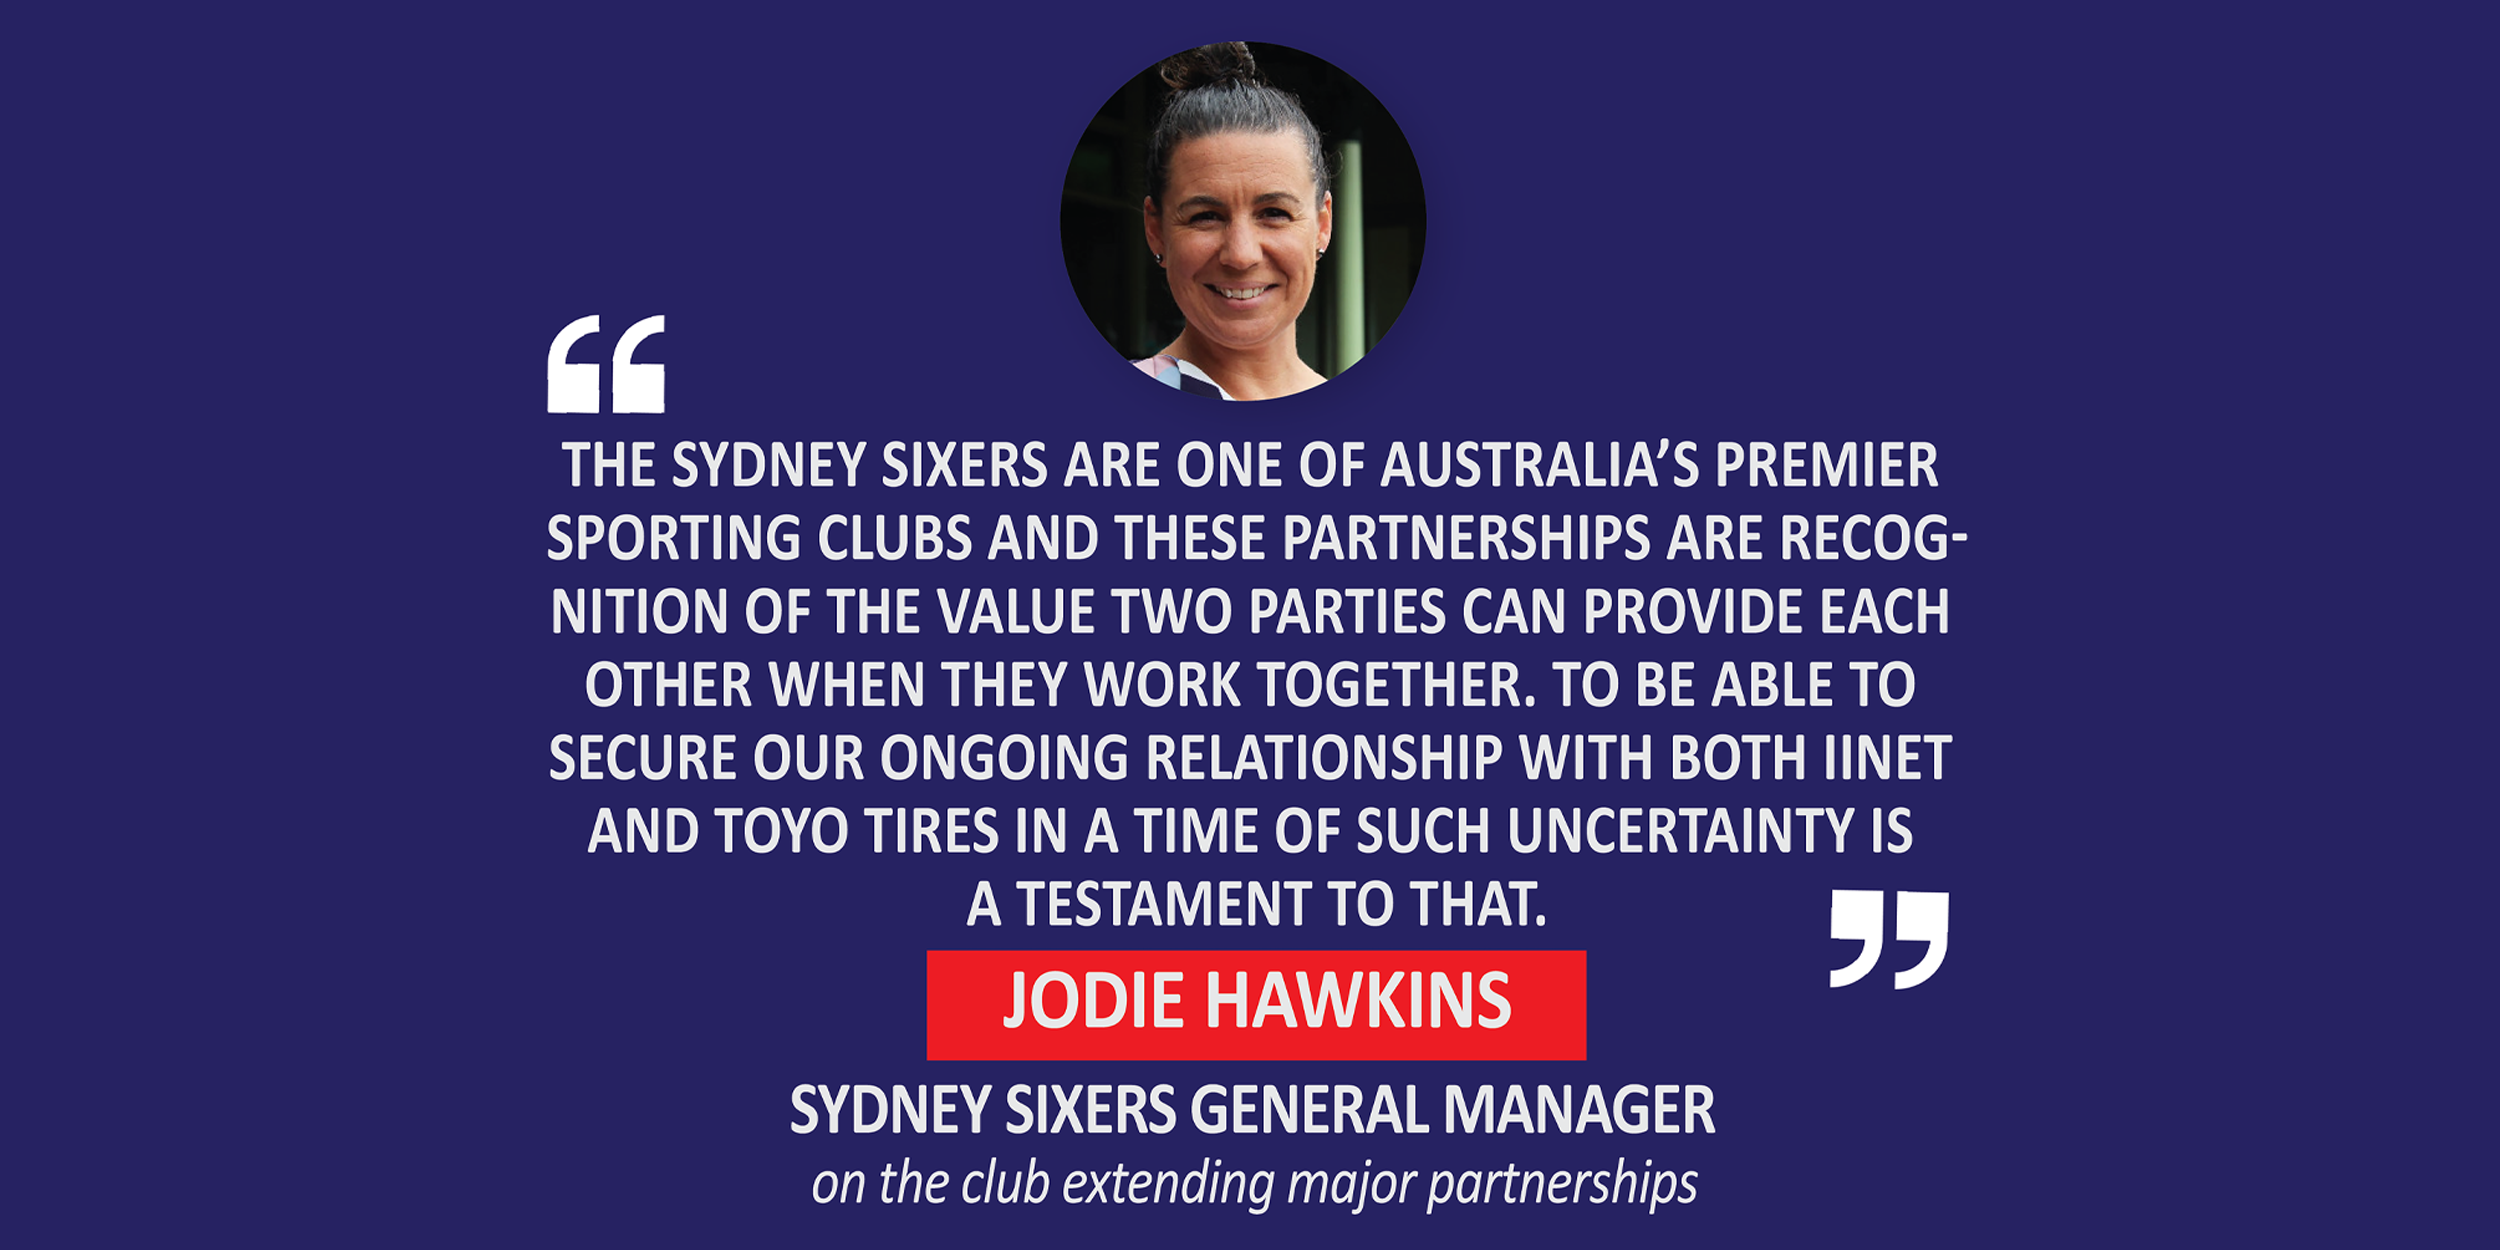 Jodie Hawkins, Sydney Sixers General Manager on the club extending major partnerships